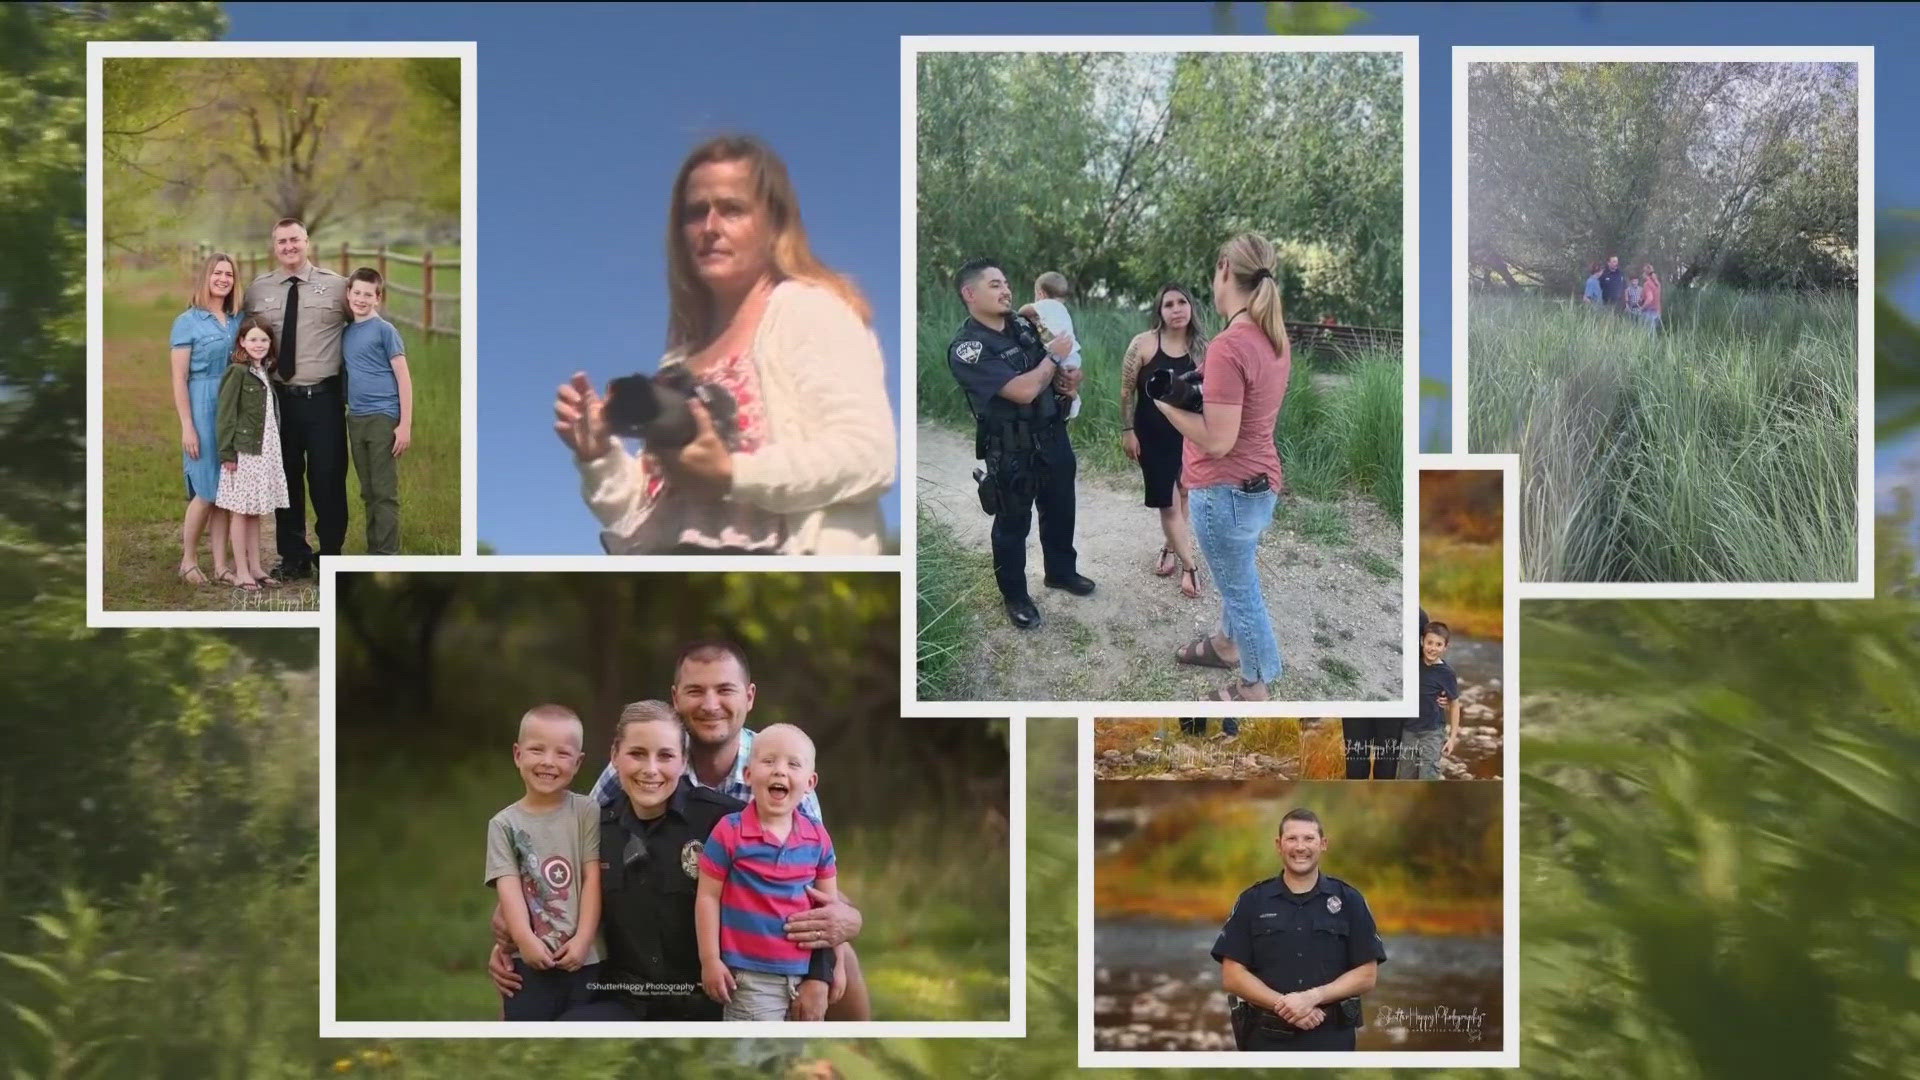 Christy Cooper is the owner of ShutterHappy Photography. She is offering free family photos to our first responders to thank them for their service and sacrifice.